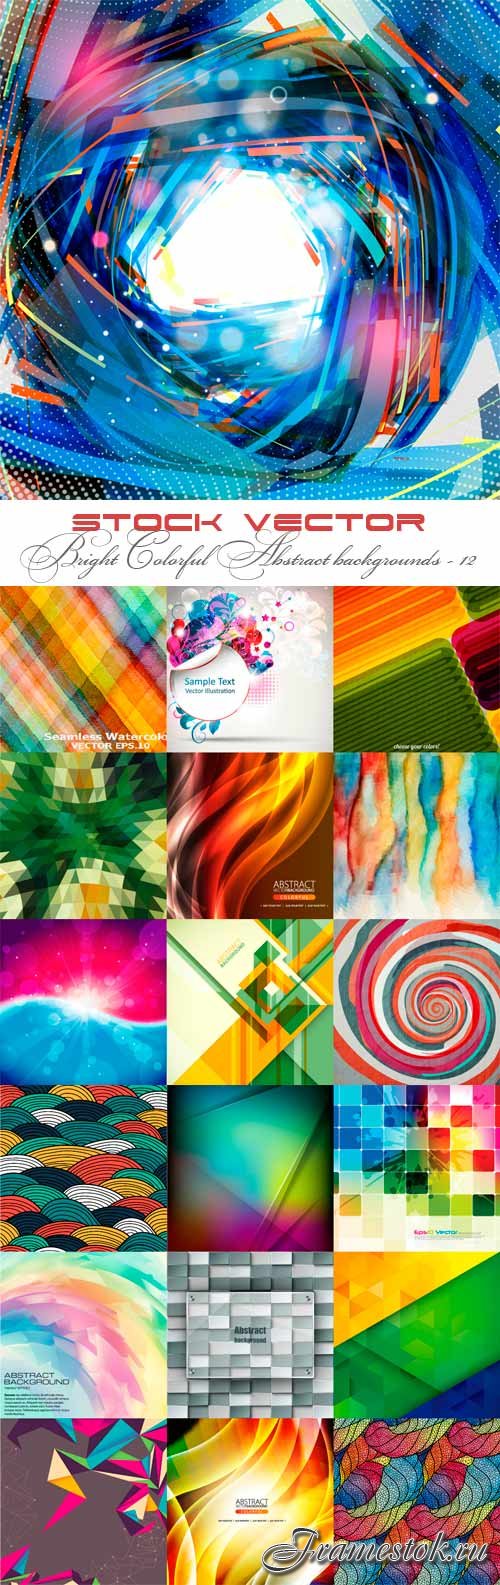 Bright colorful abstract backgrounds vector - 12